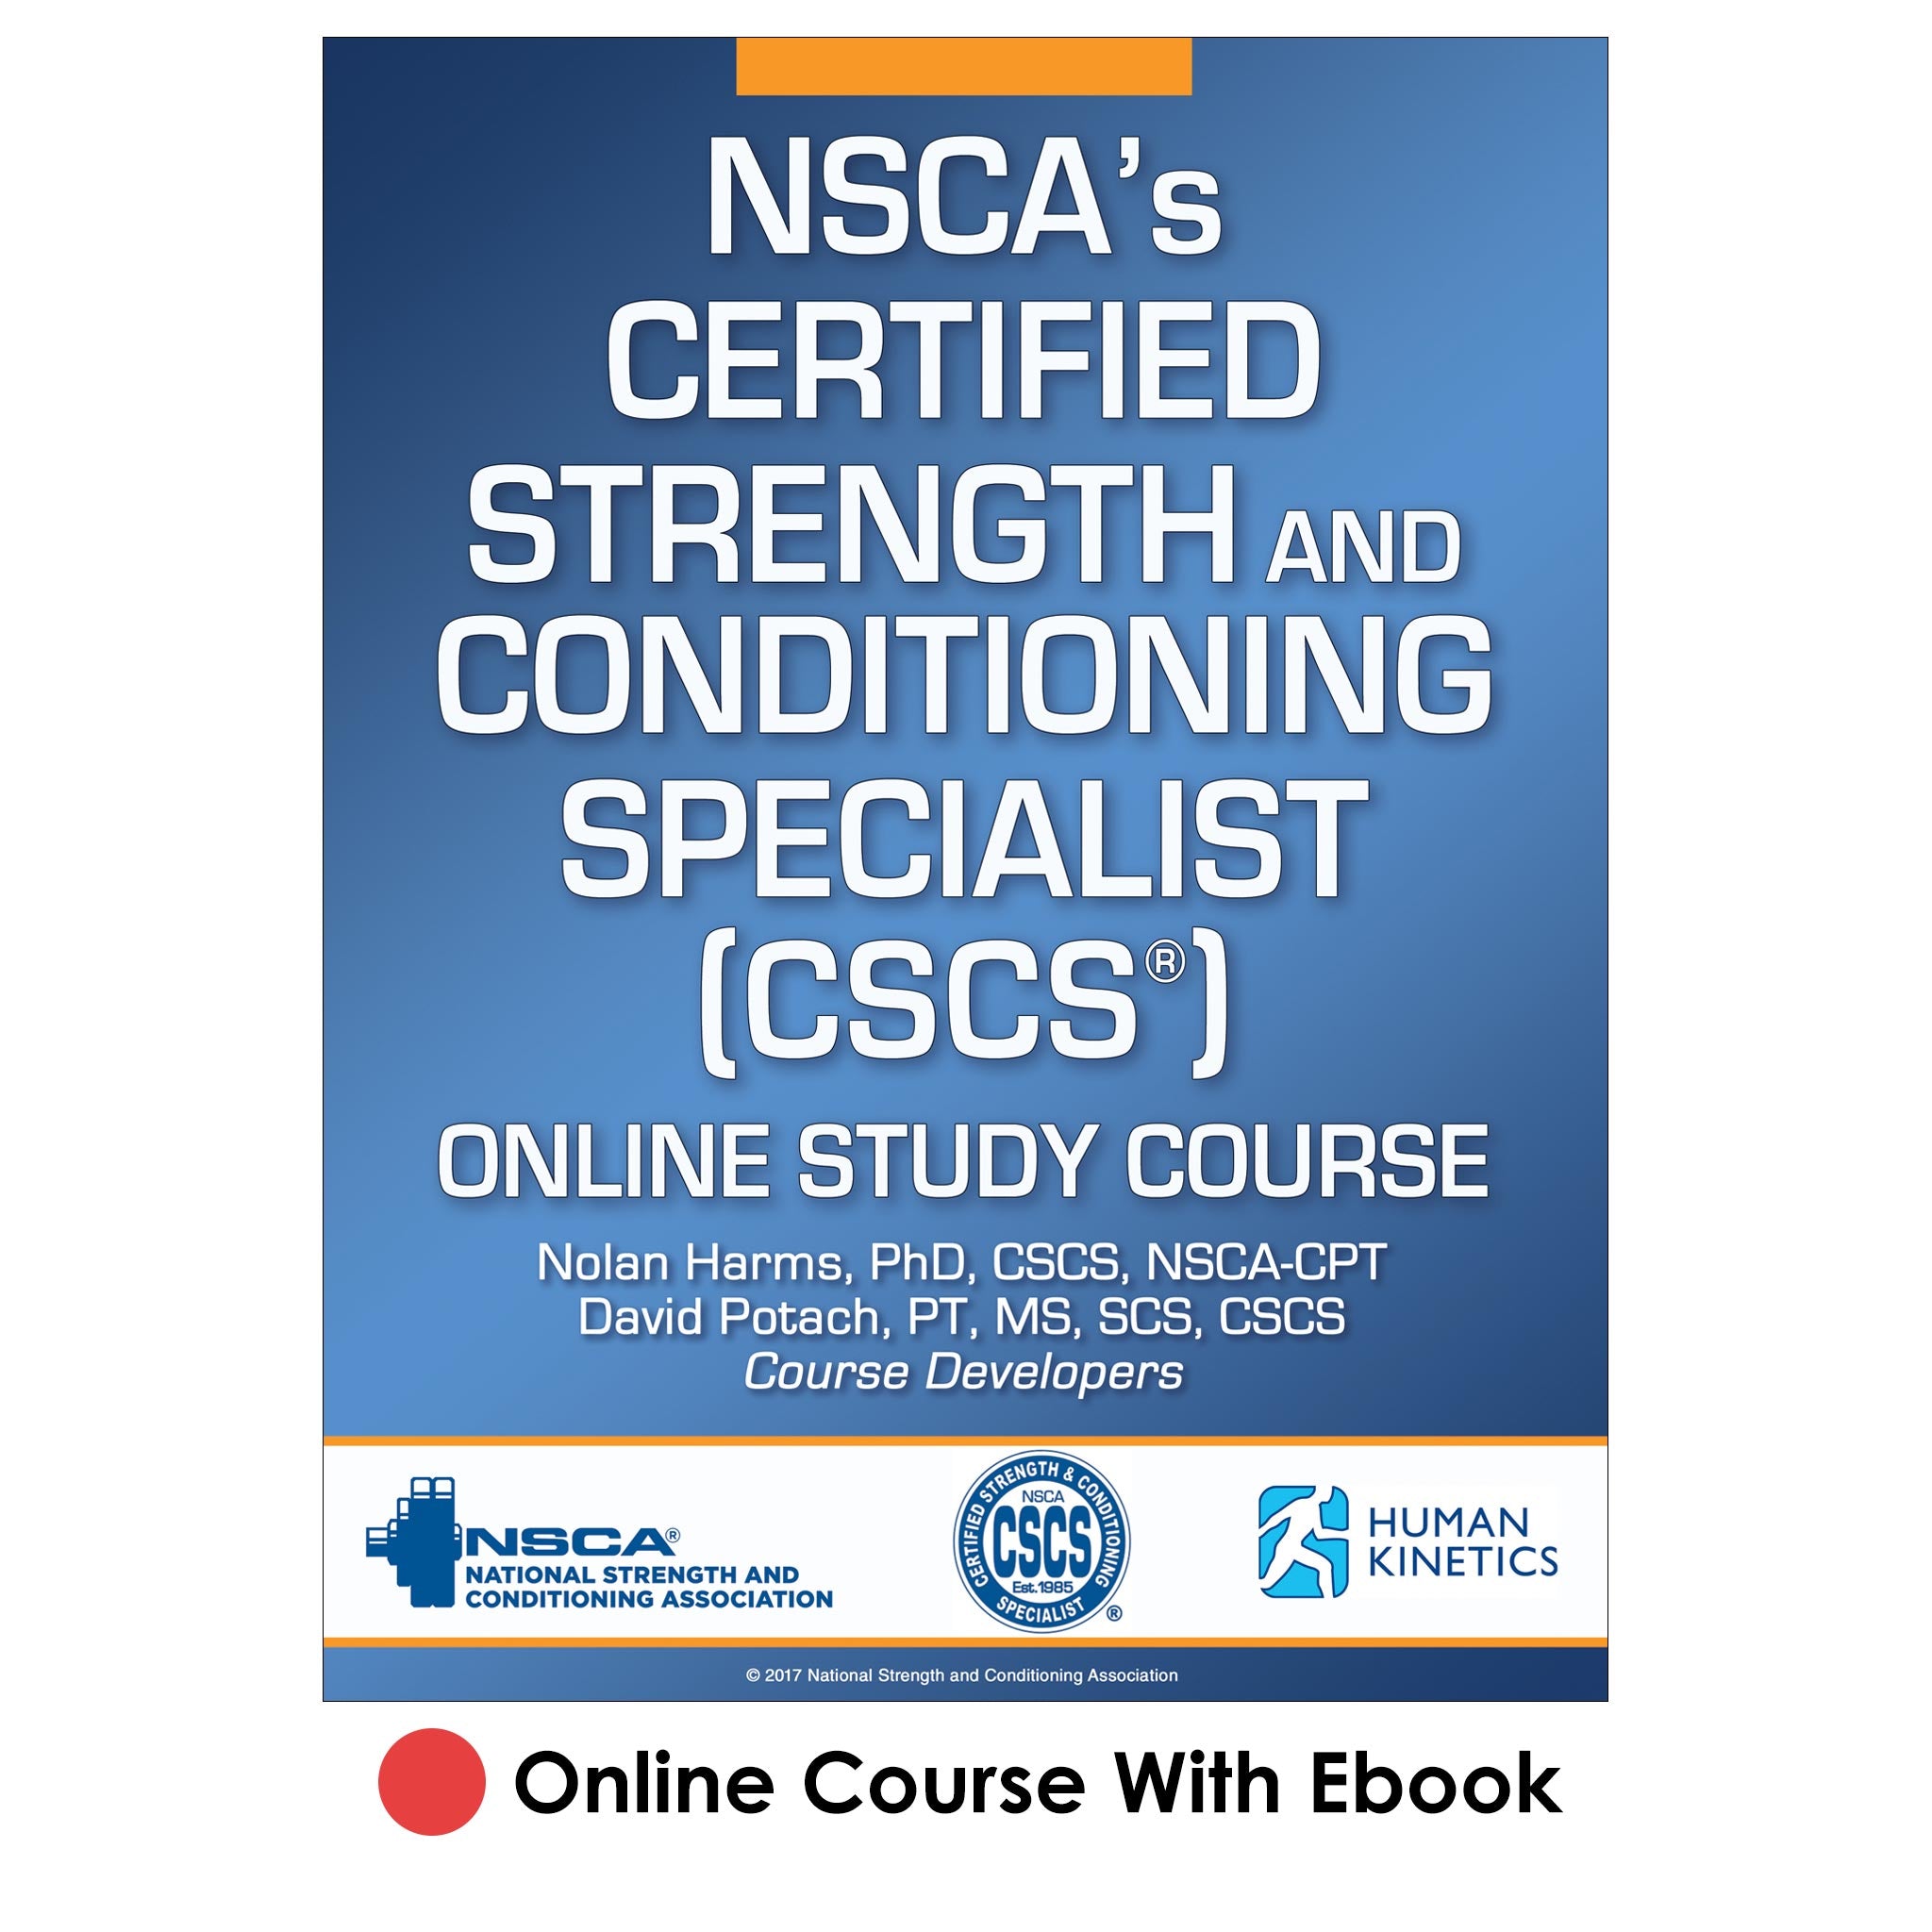 NSCA's Certified Strength and Conditioning Specialist (CSCS